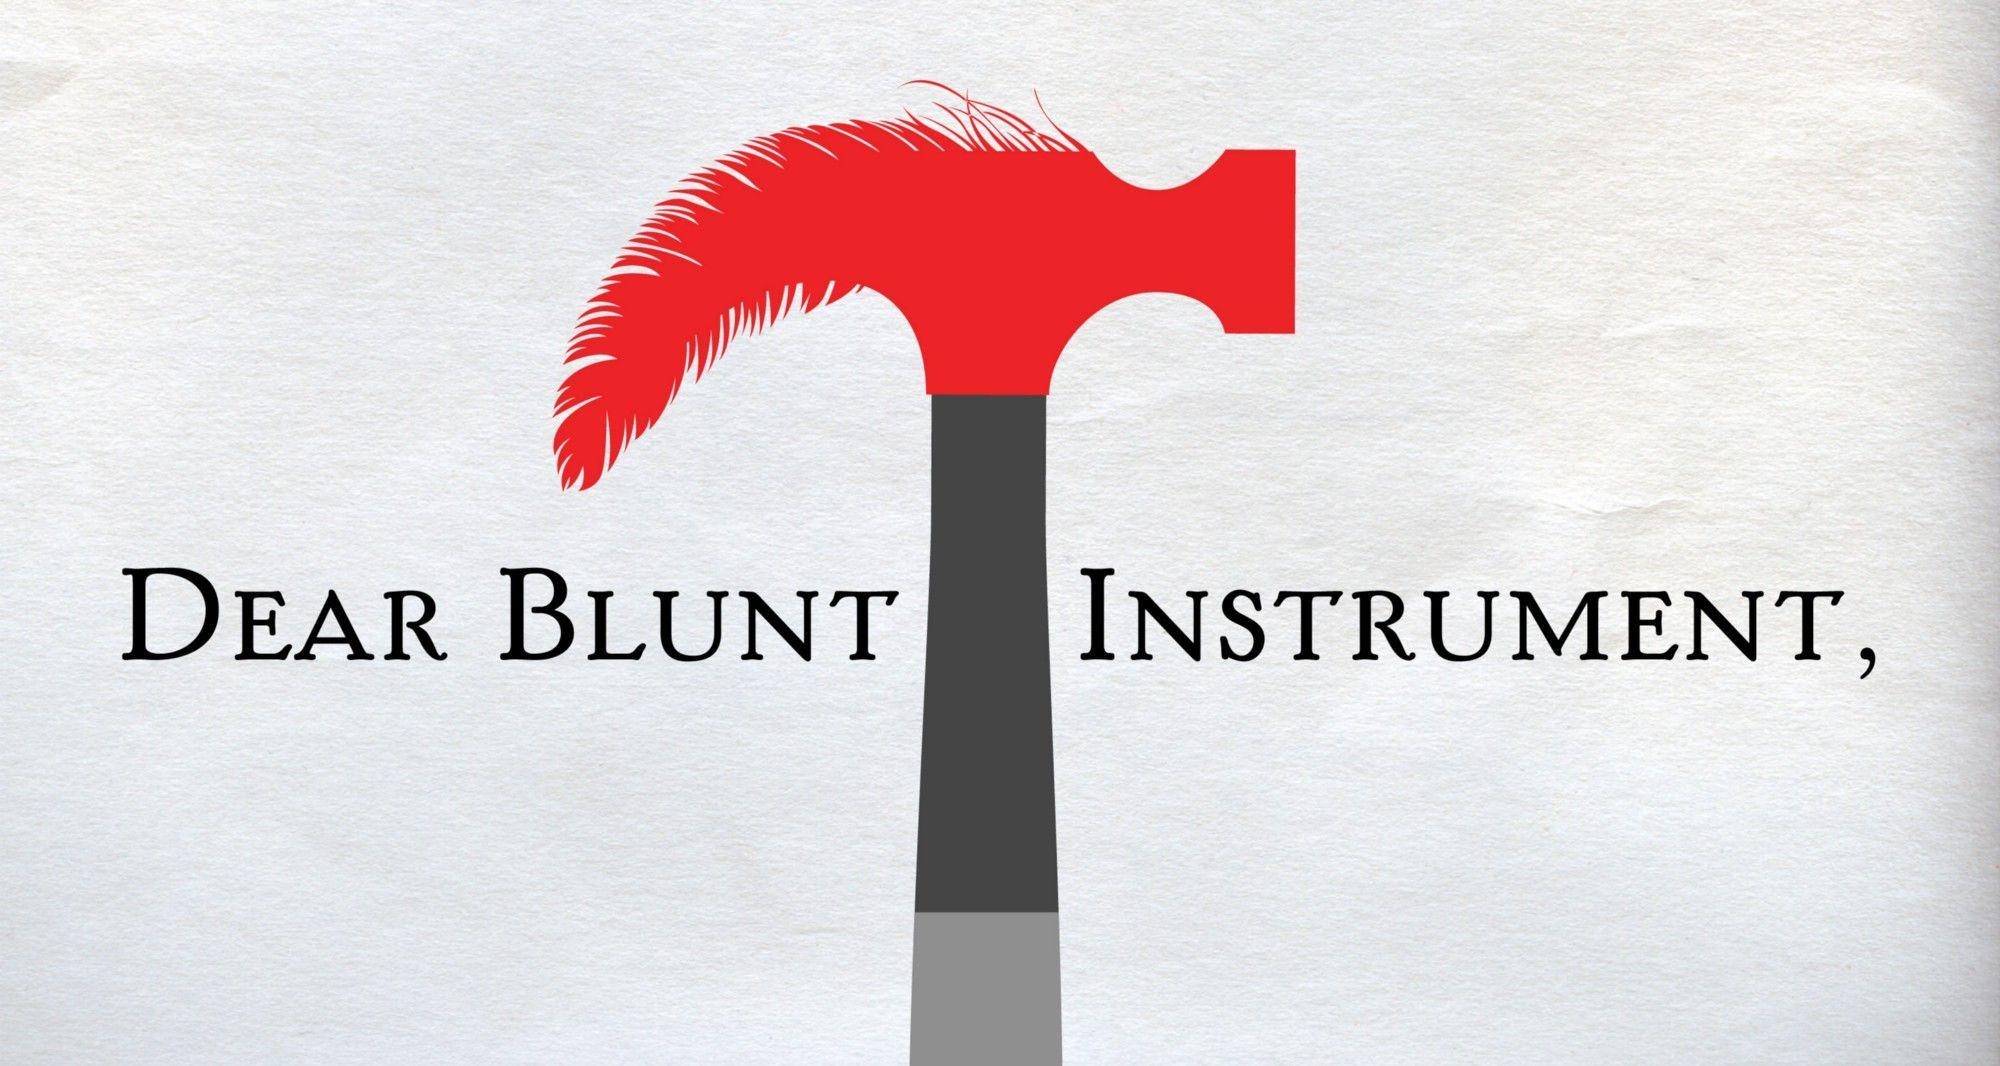 Poppy Books Logo - How Do You Know When Your Book Is Finished?: The Blunt Instrument